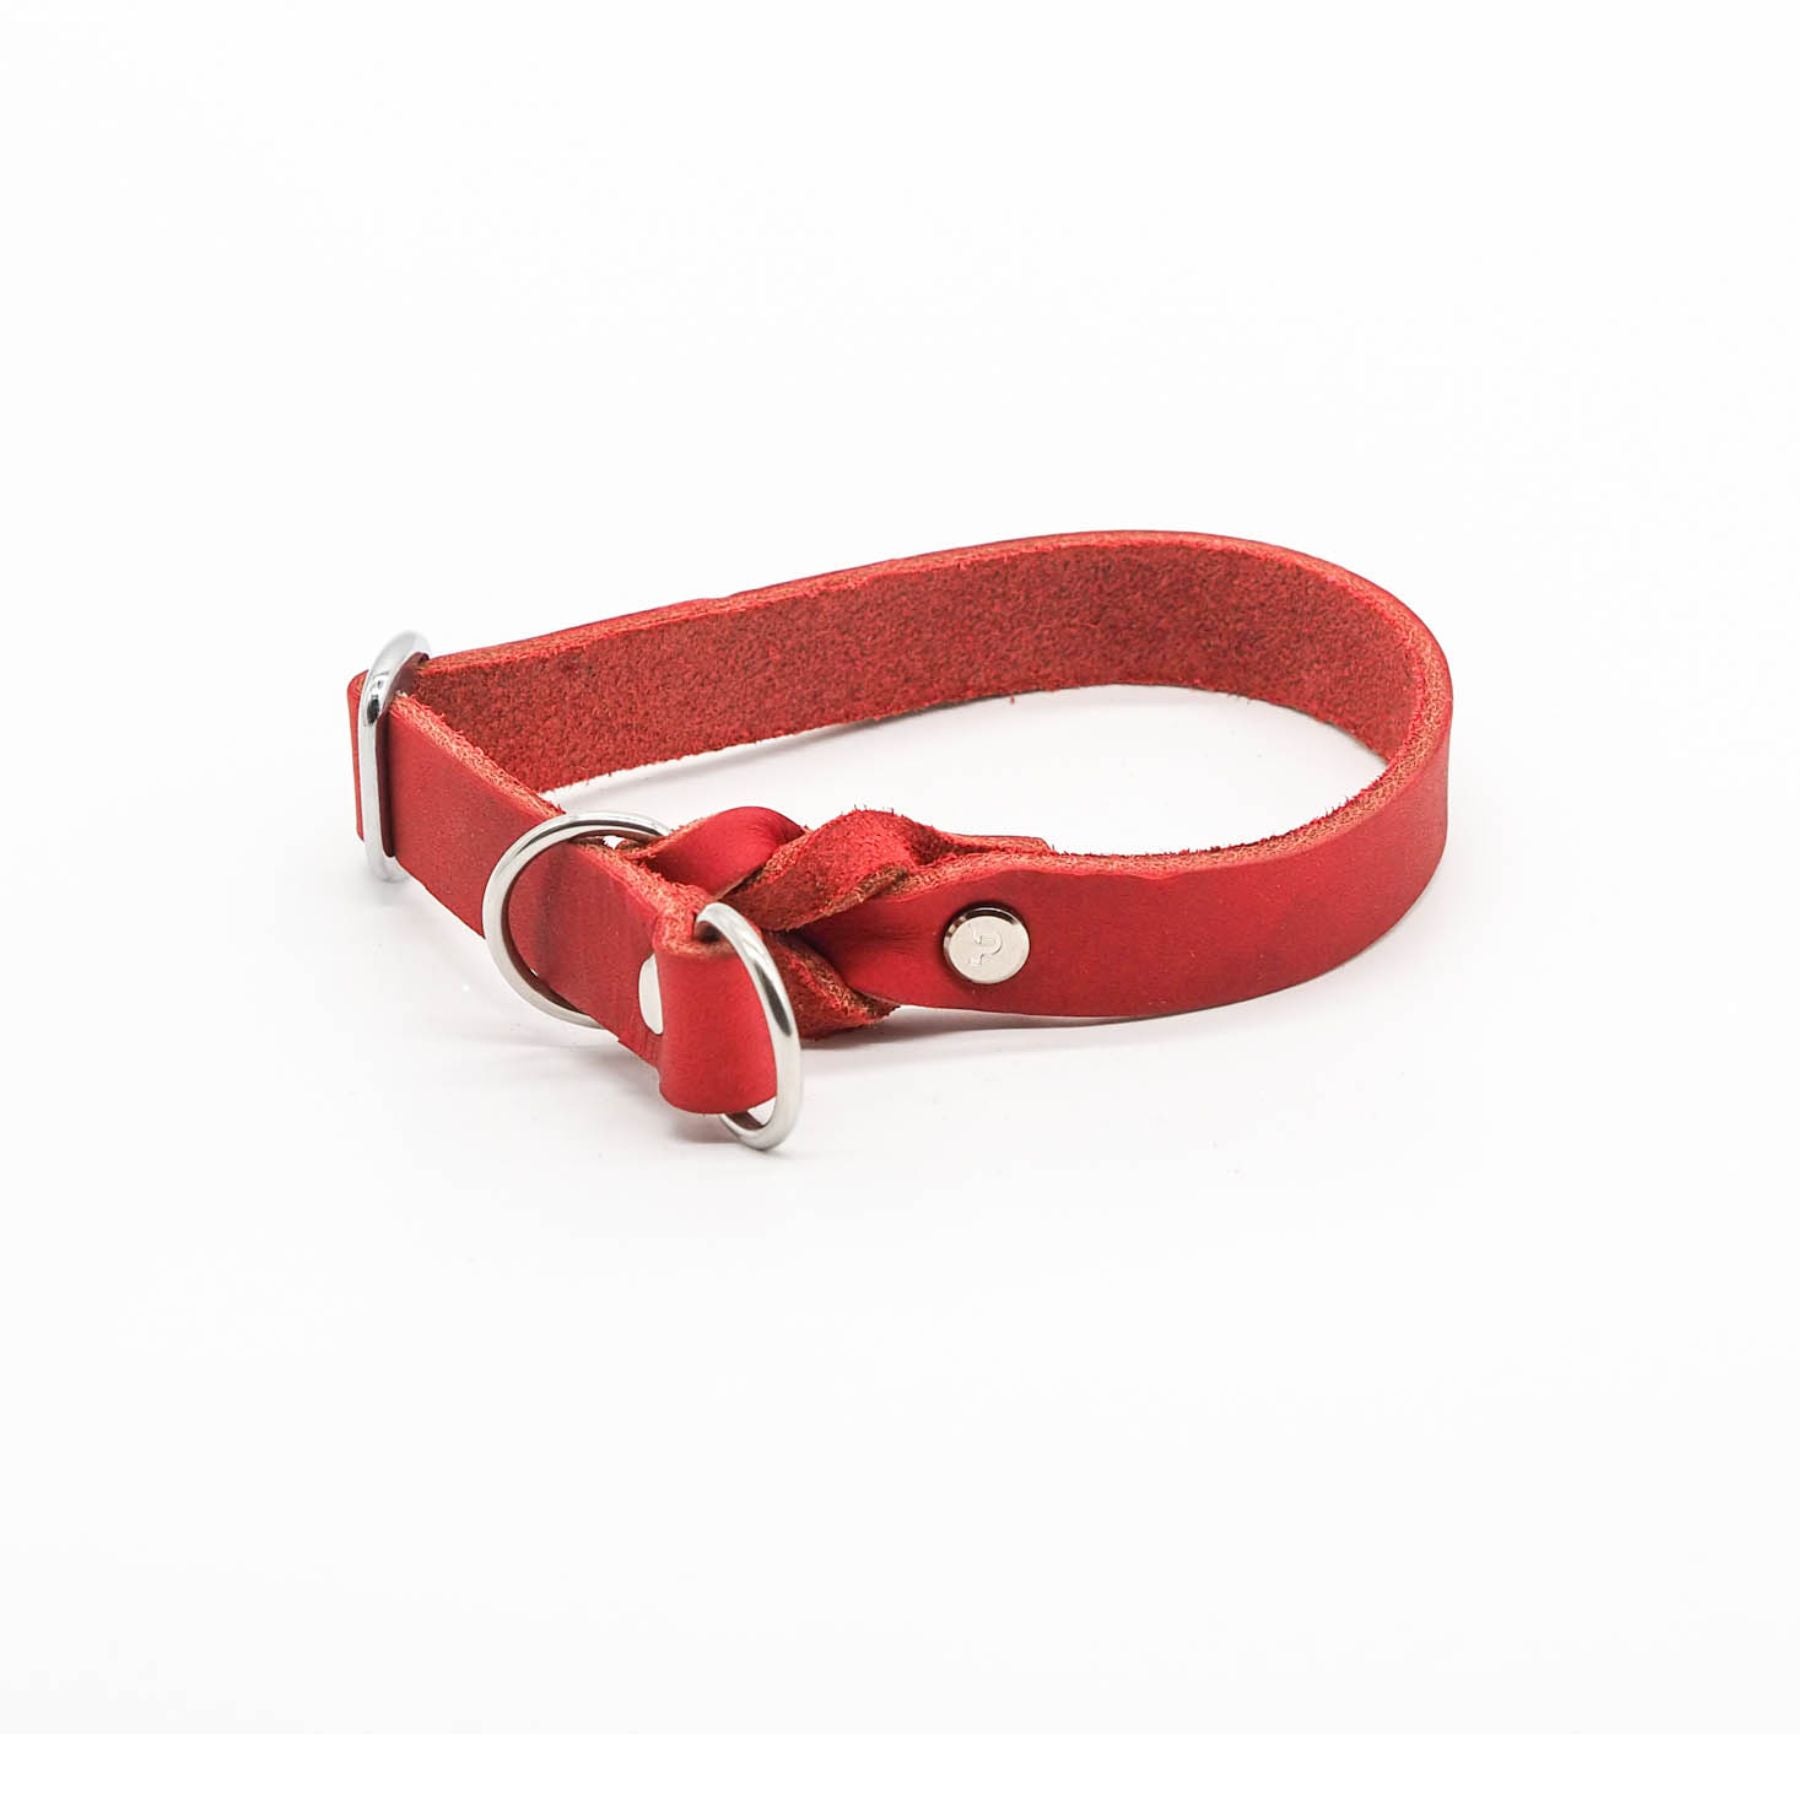 Pull stop collar made of greased leather 'Chili'